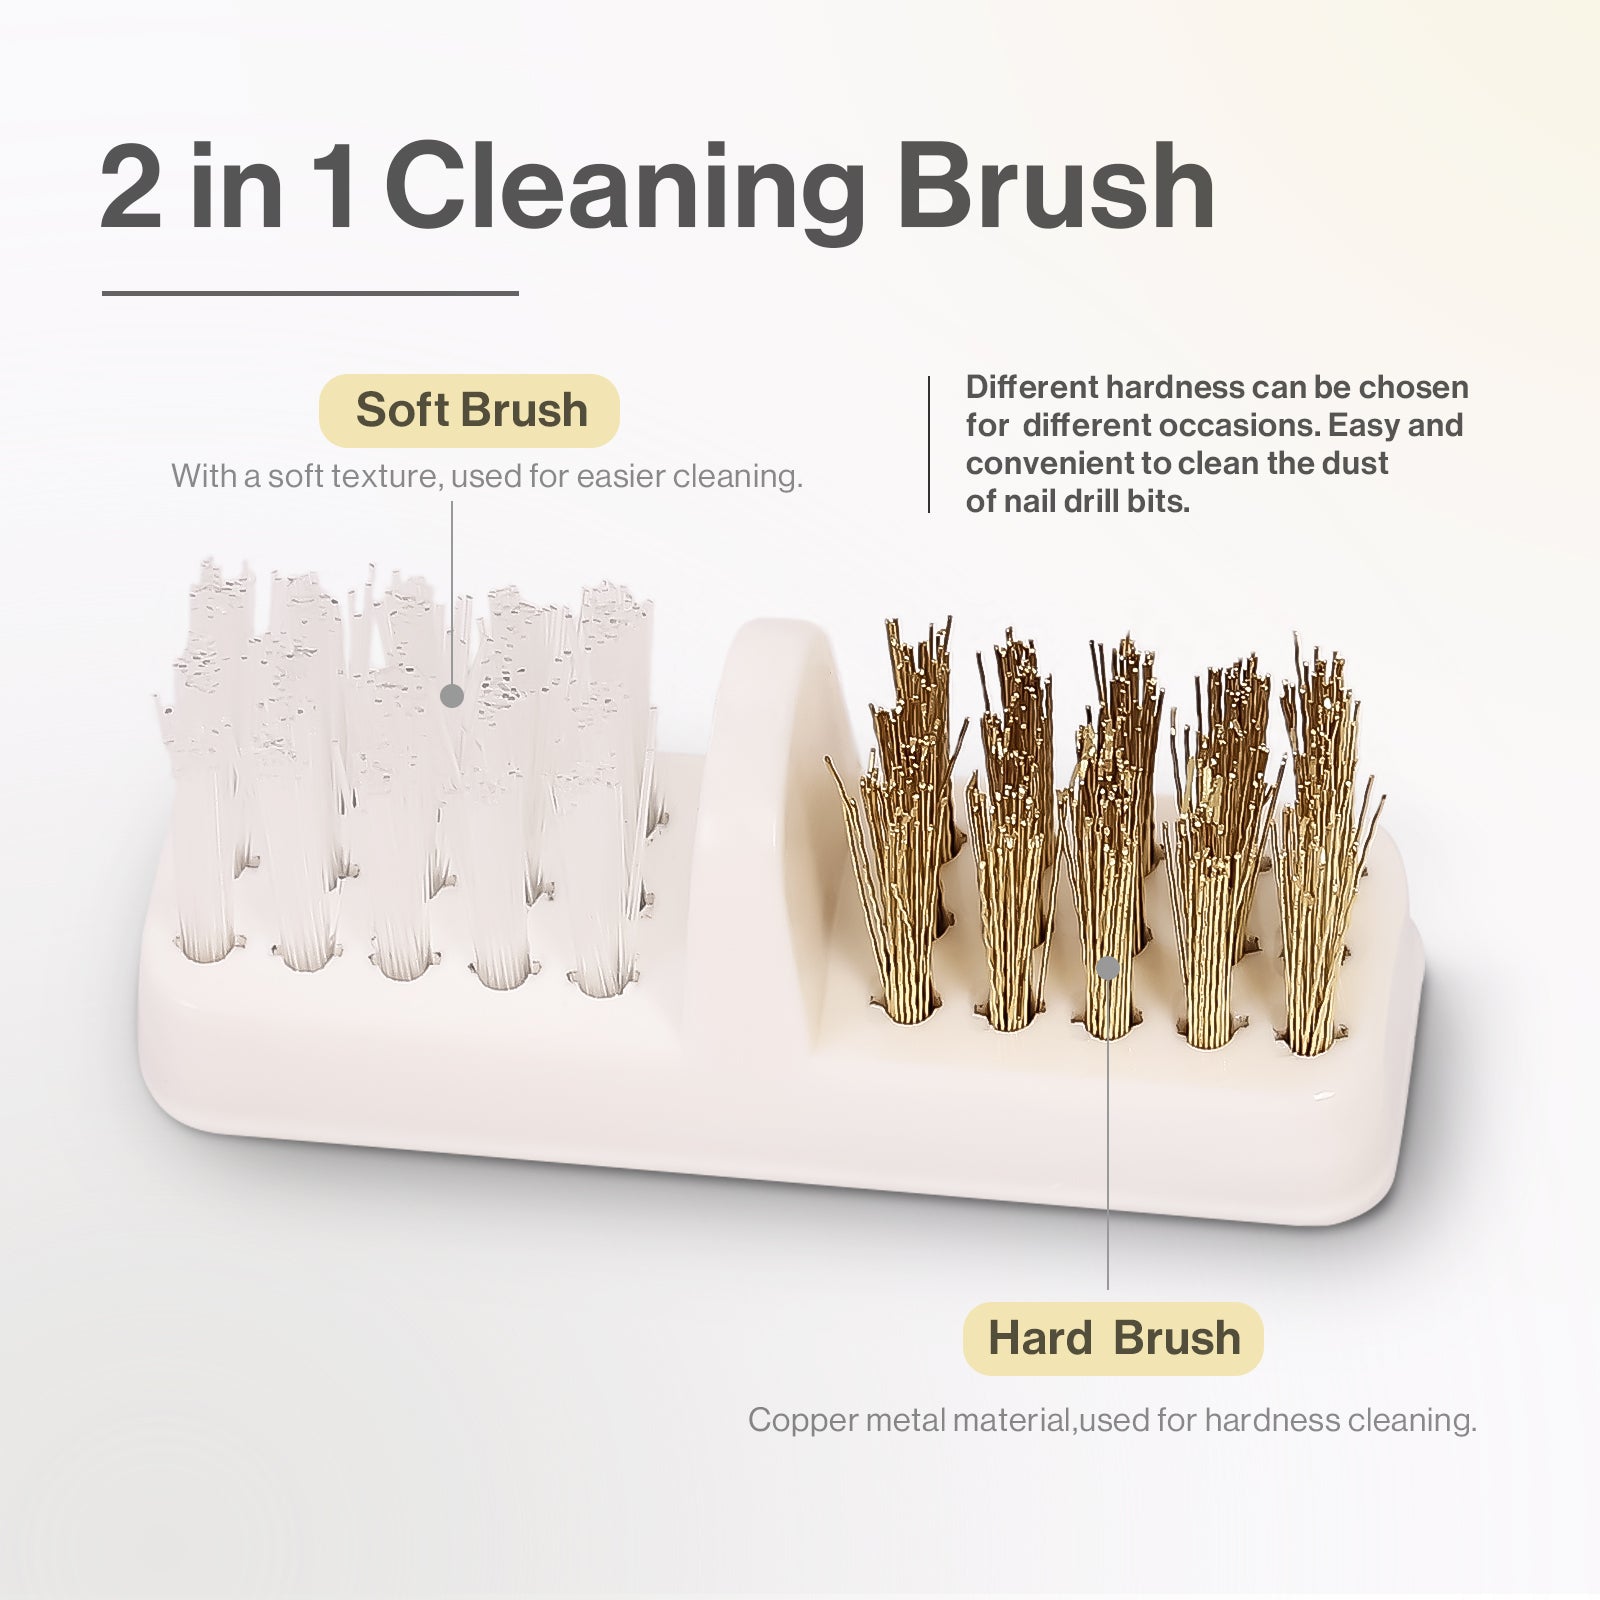 5 in 1 Magic Cleaning Brush – Discounters